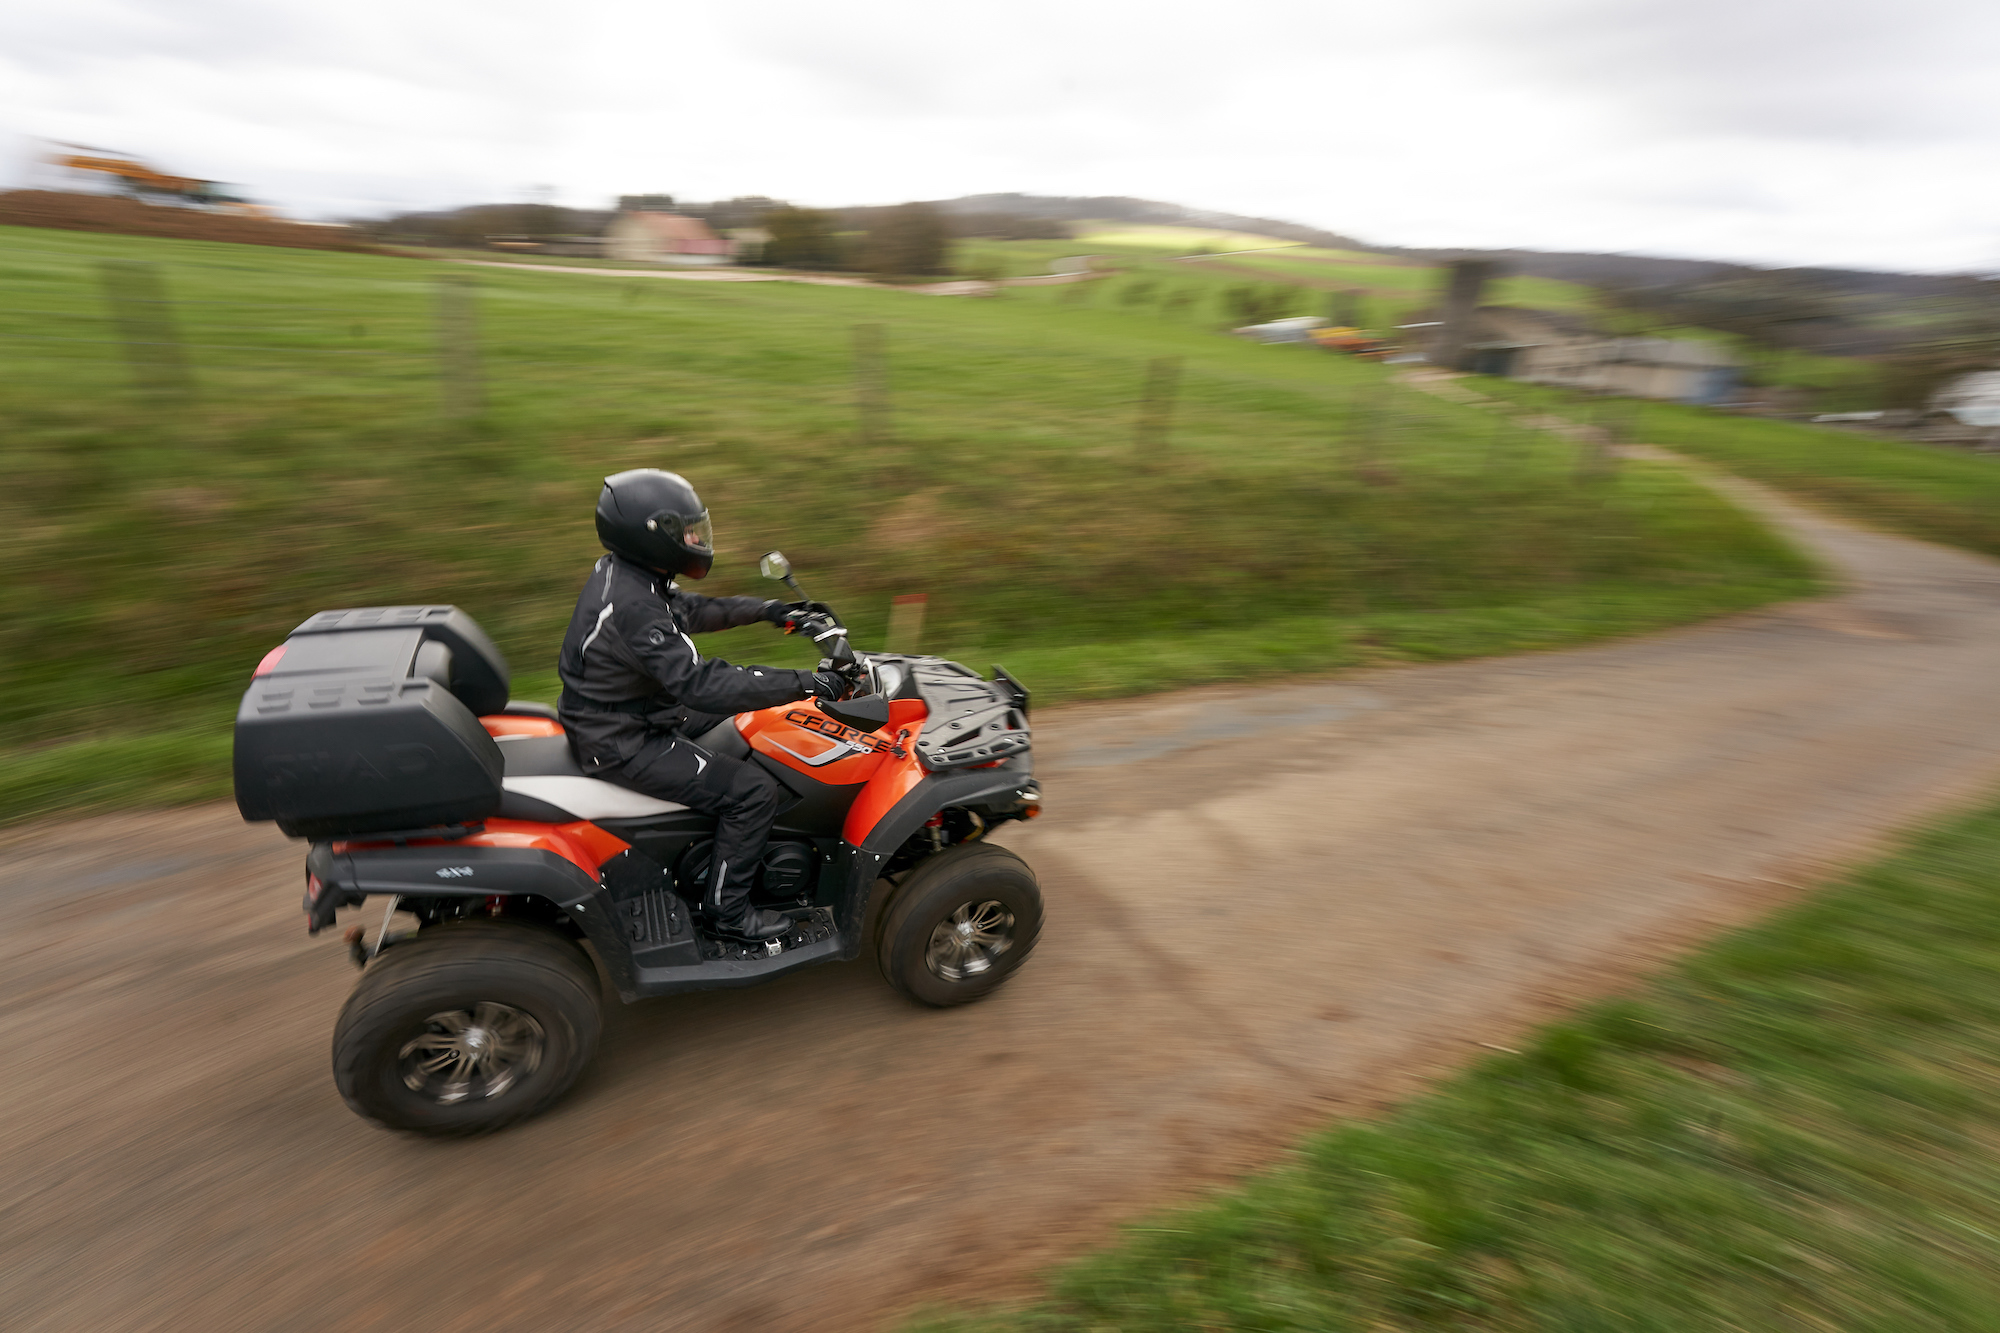 A rider driving a CFORCE ATV on a country road on on March 27, 2021